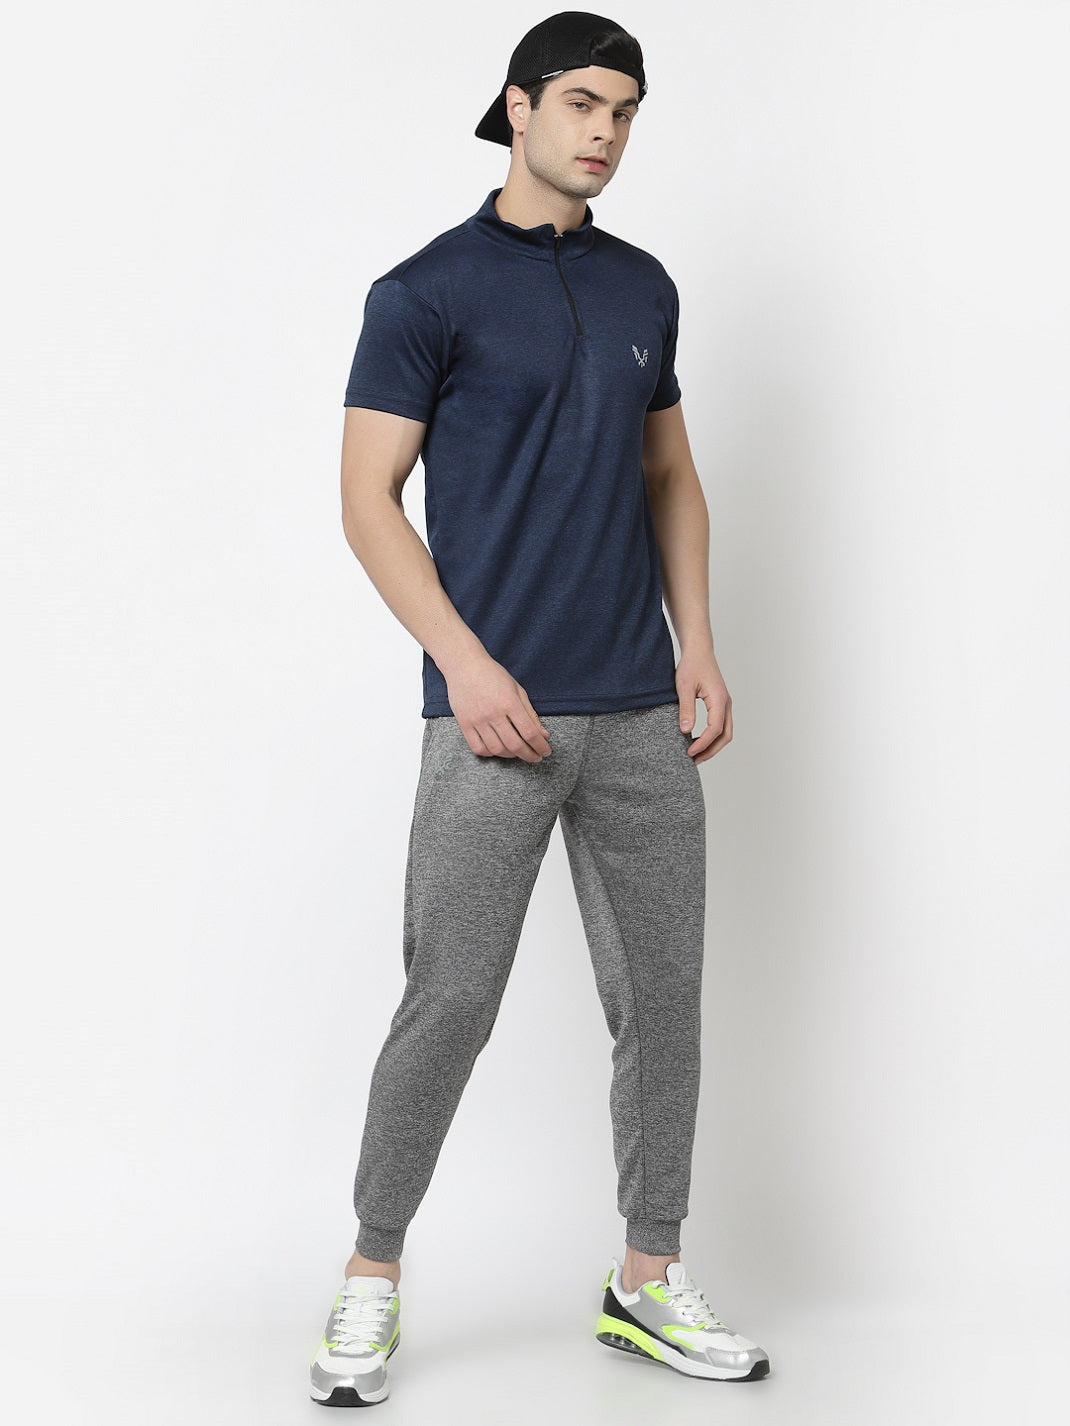 UZARUS Men's Joggers Track Pants with 1 Zippered Pocket for Gym, Yoga, Workout and Casual Wear